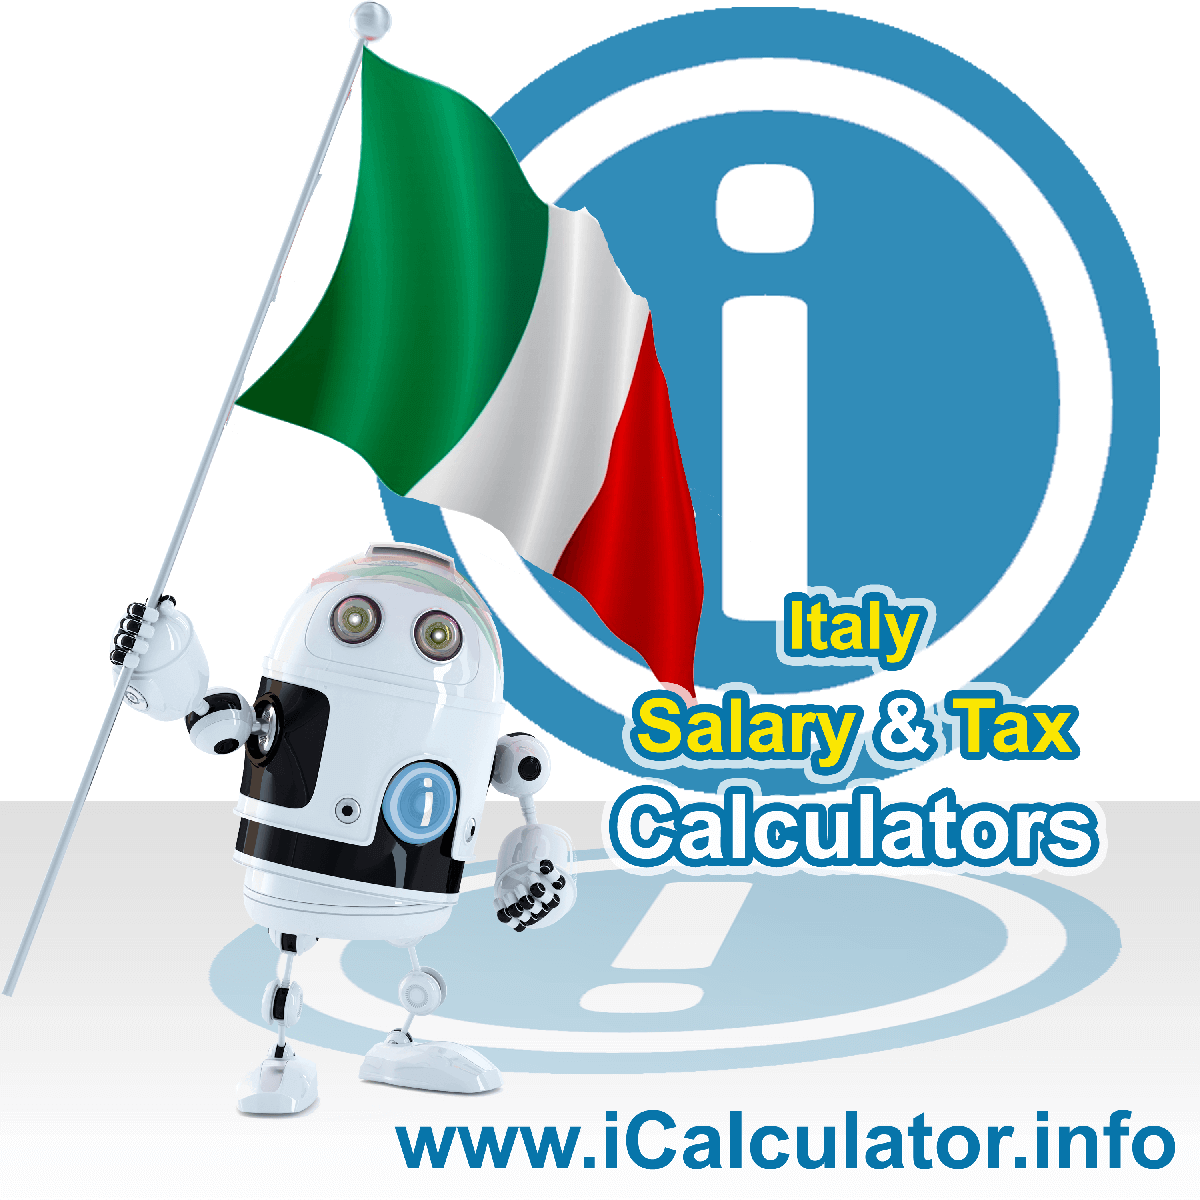 Italy Salary Calculator. This image shows the Italyese flag and information relating to the tax formula for the Italy Tax Calculator